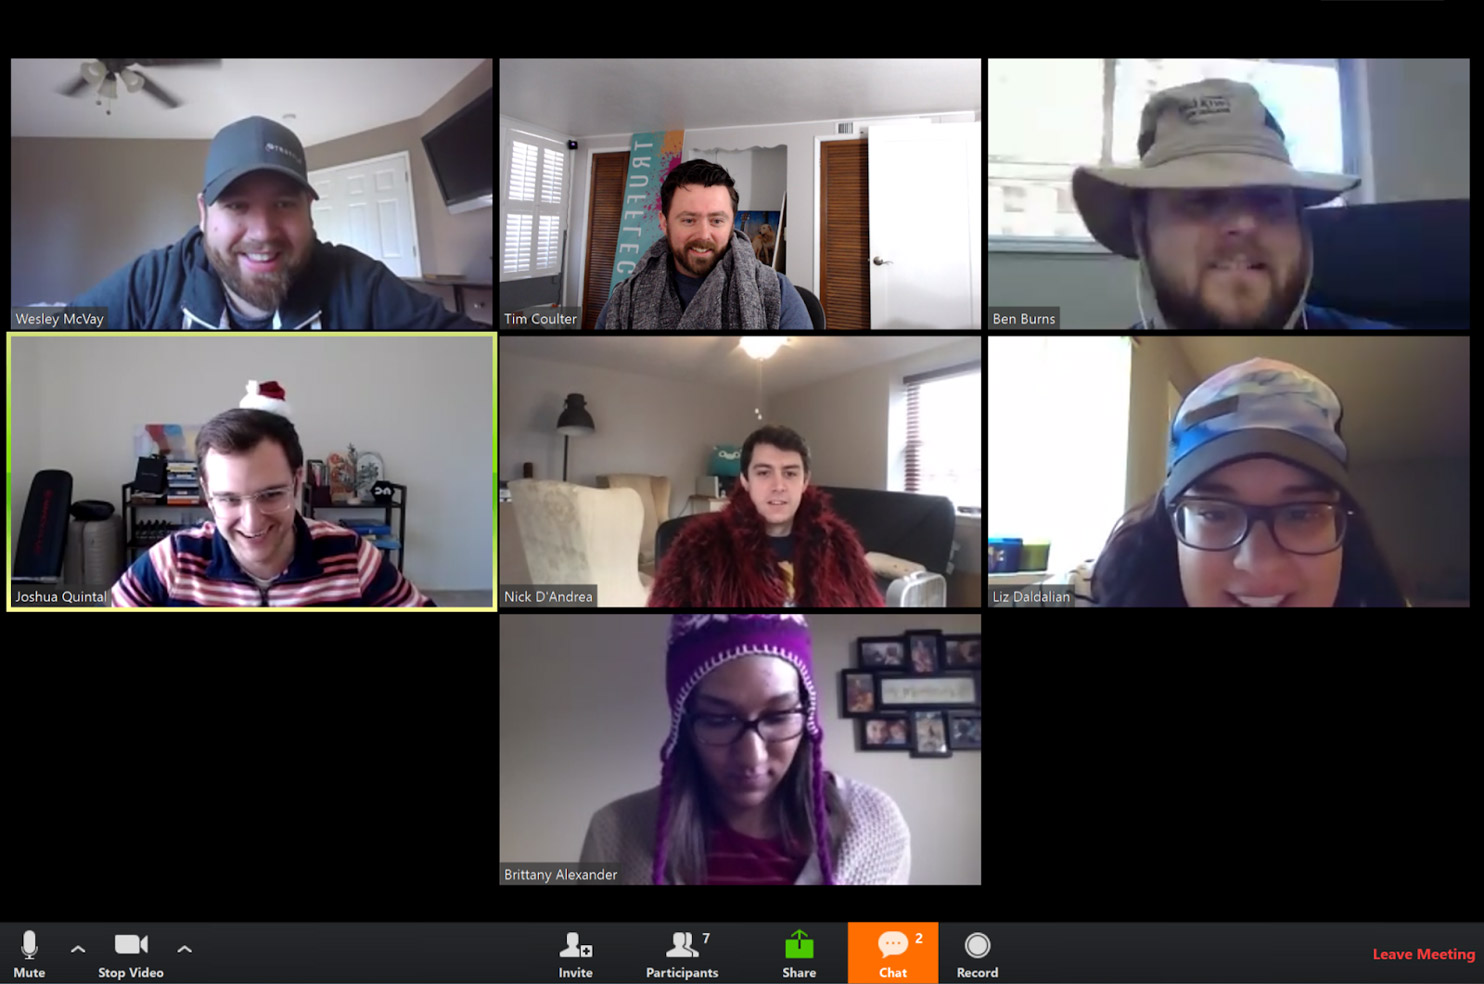 Truffle team meeting featuring funny hats and coats